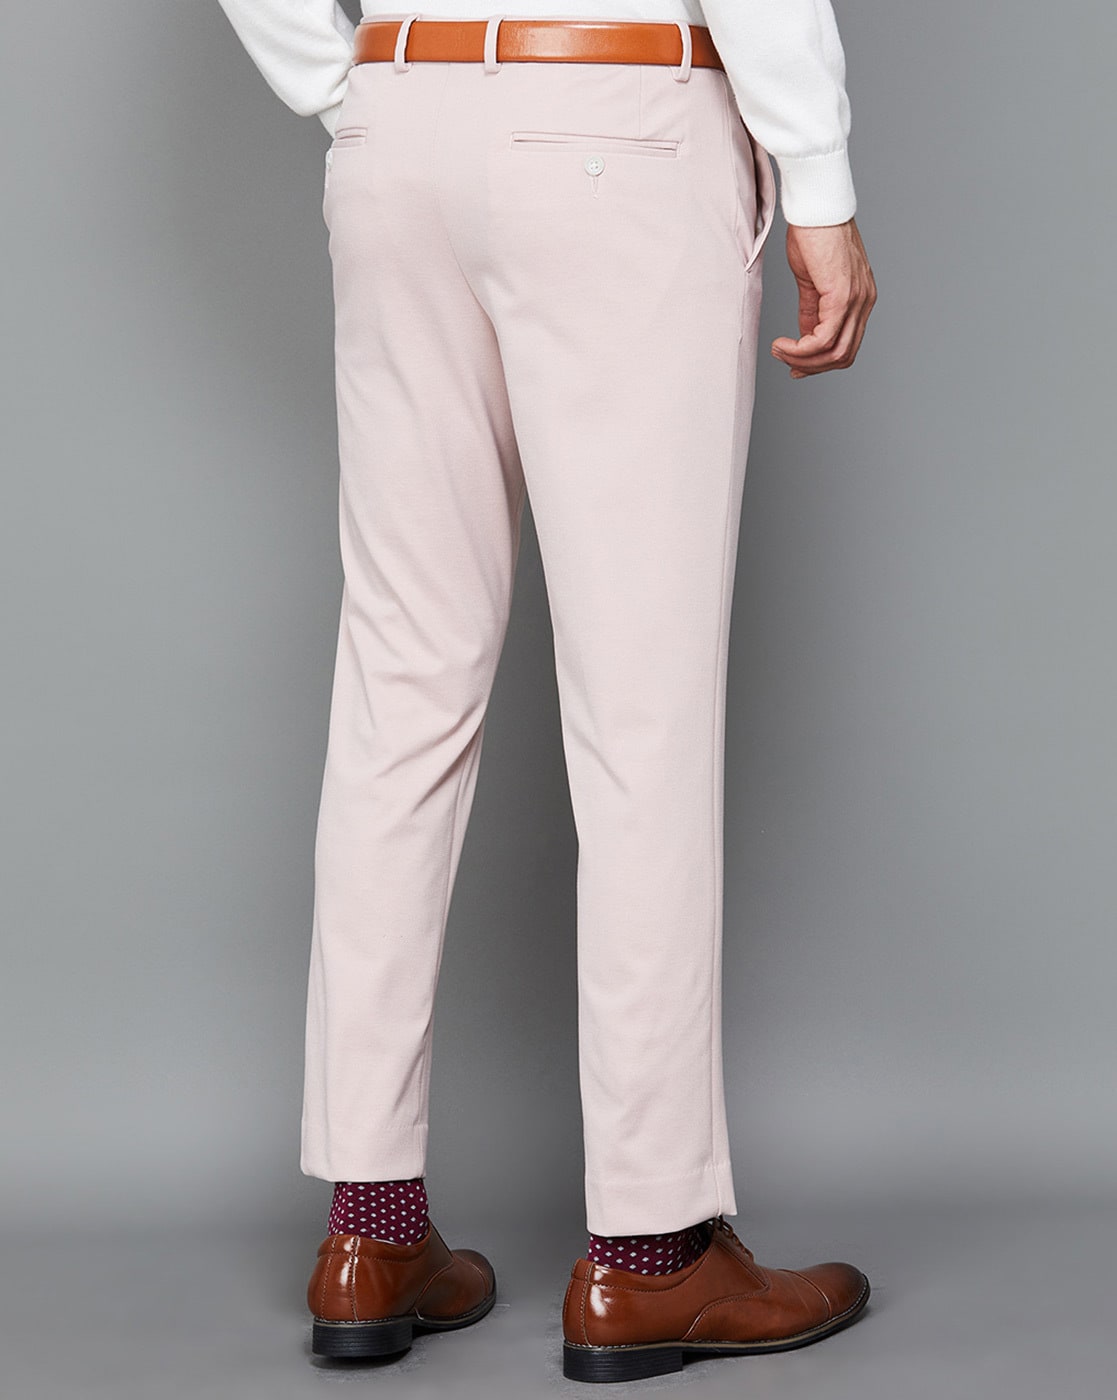 Suit trousers Skinny Fit - Light pink - Men | H&M IN